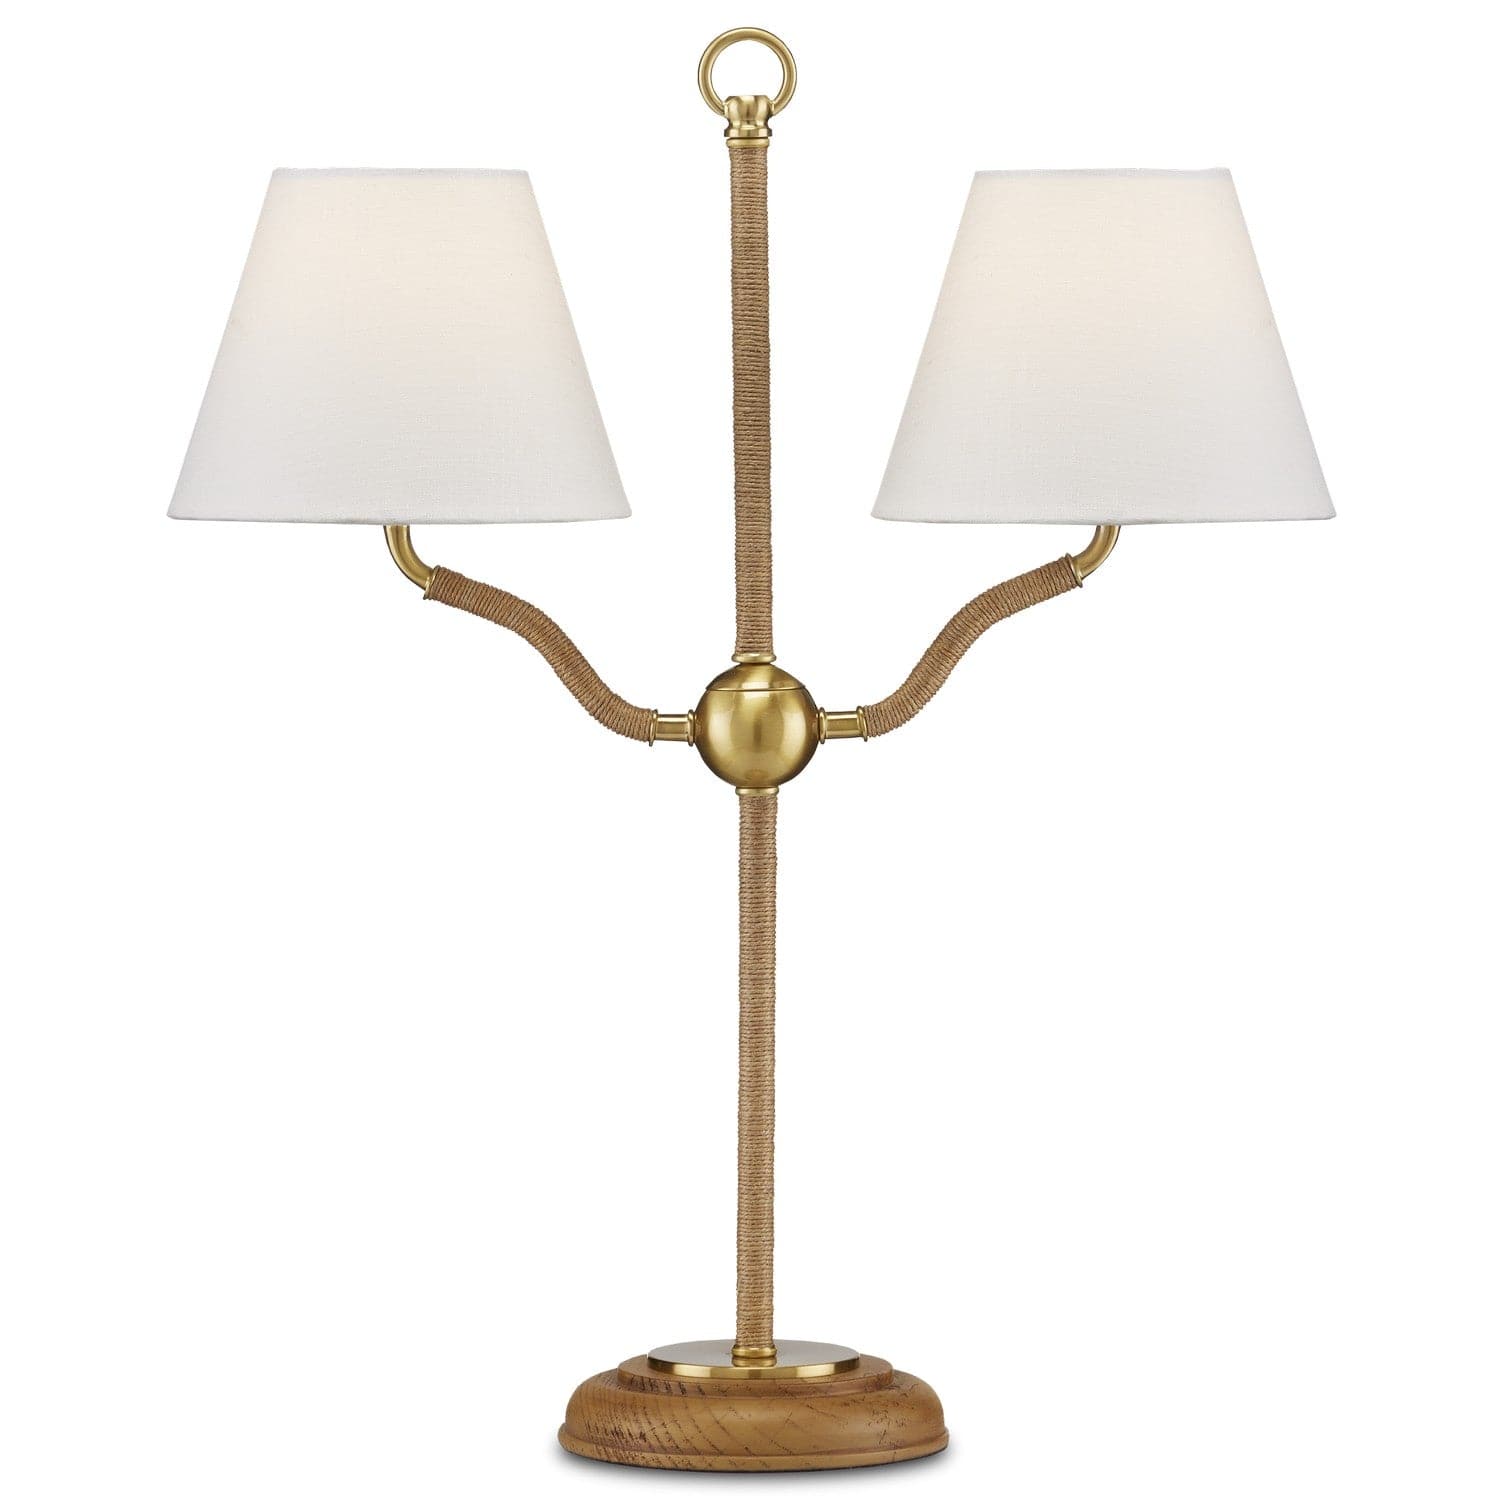 Currey and Company - 6000-0873 - Two Light Desk Lamp - Natural/Antique Brass